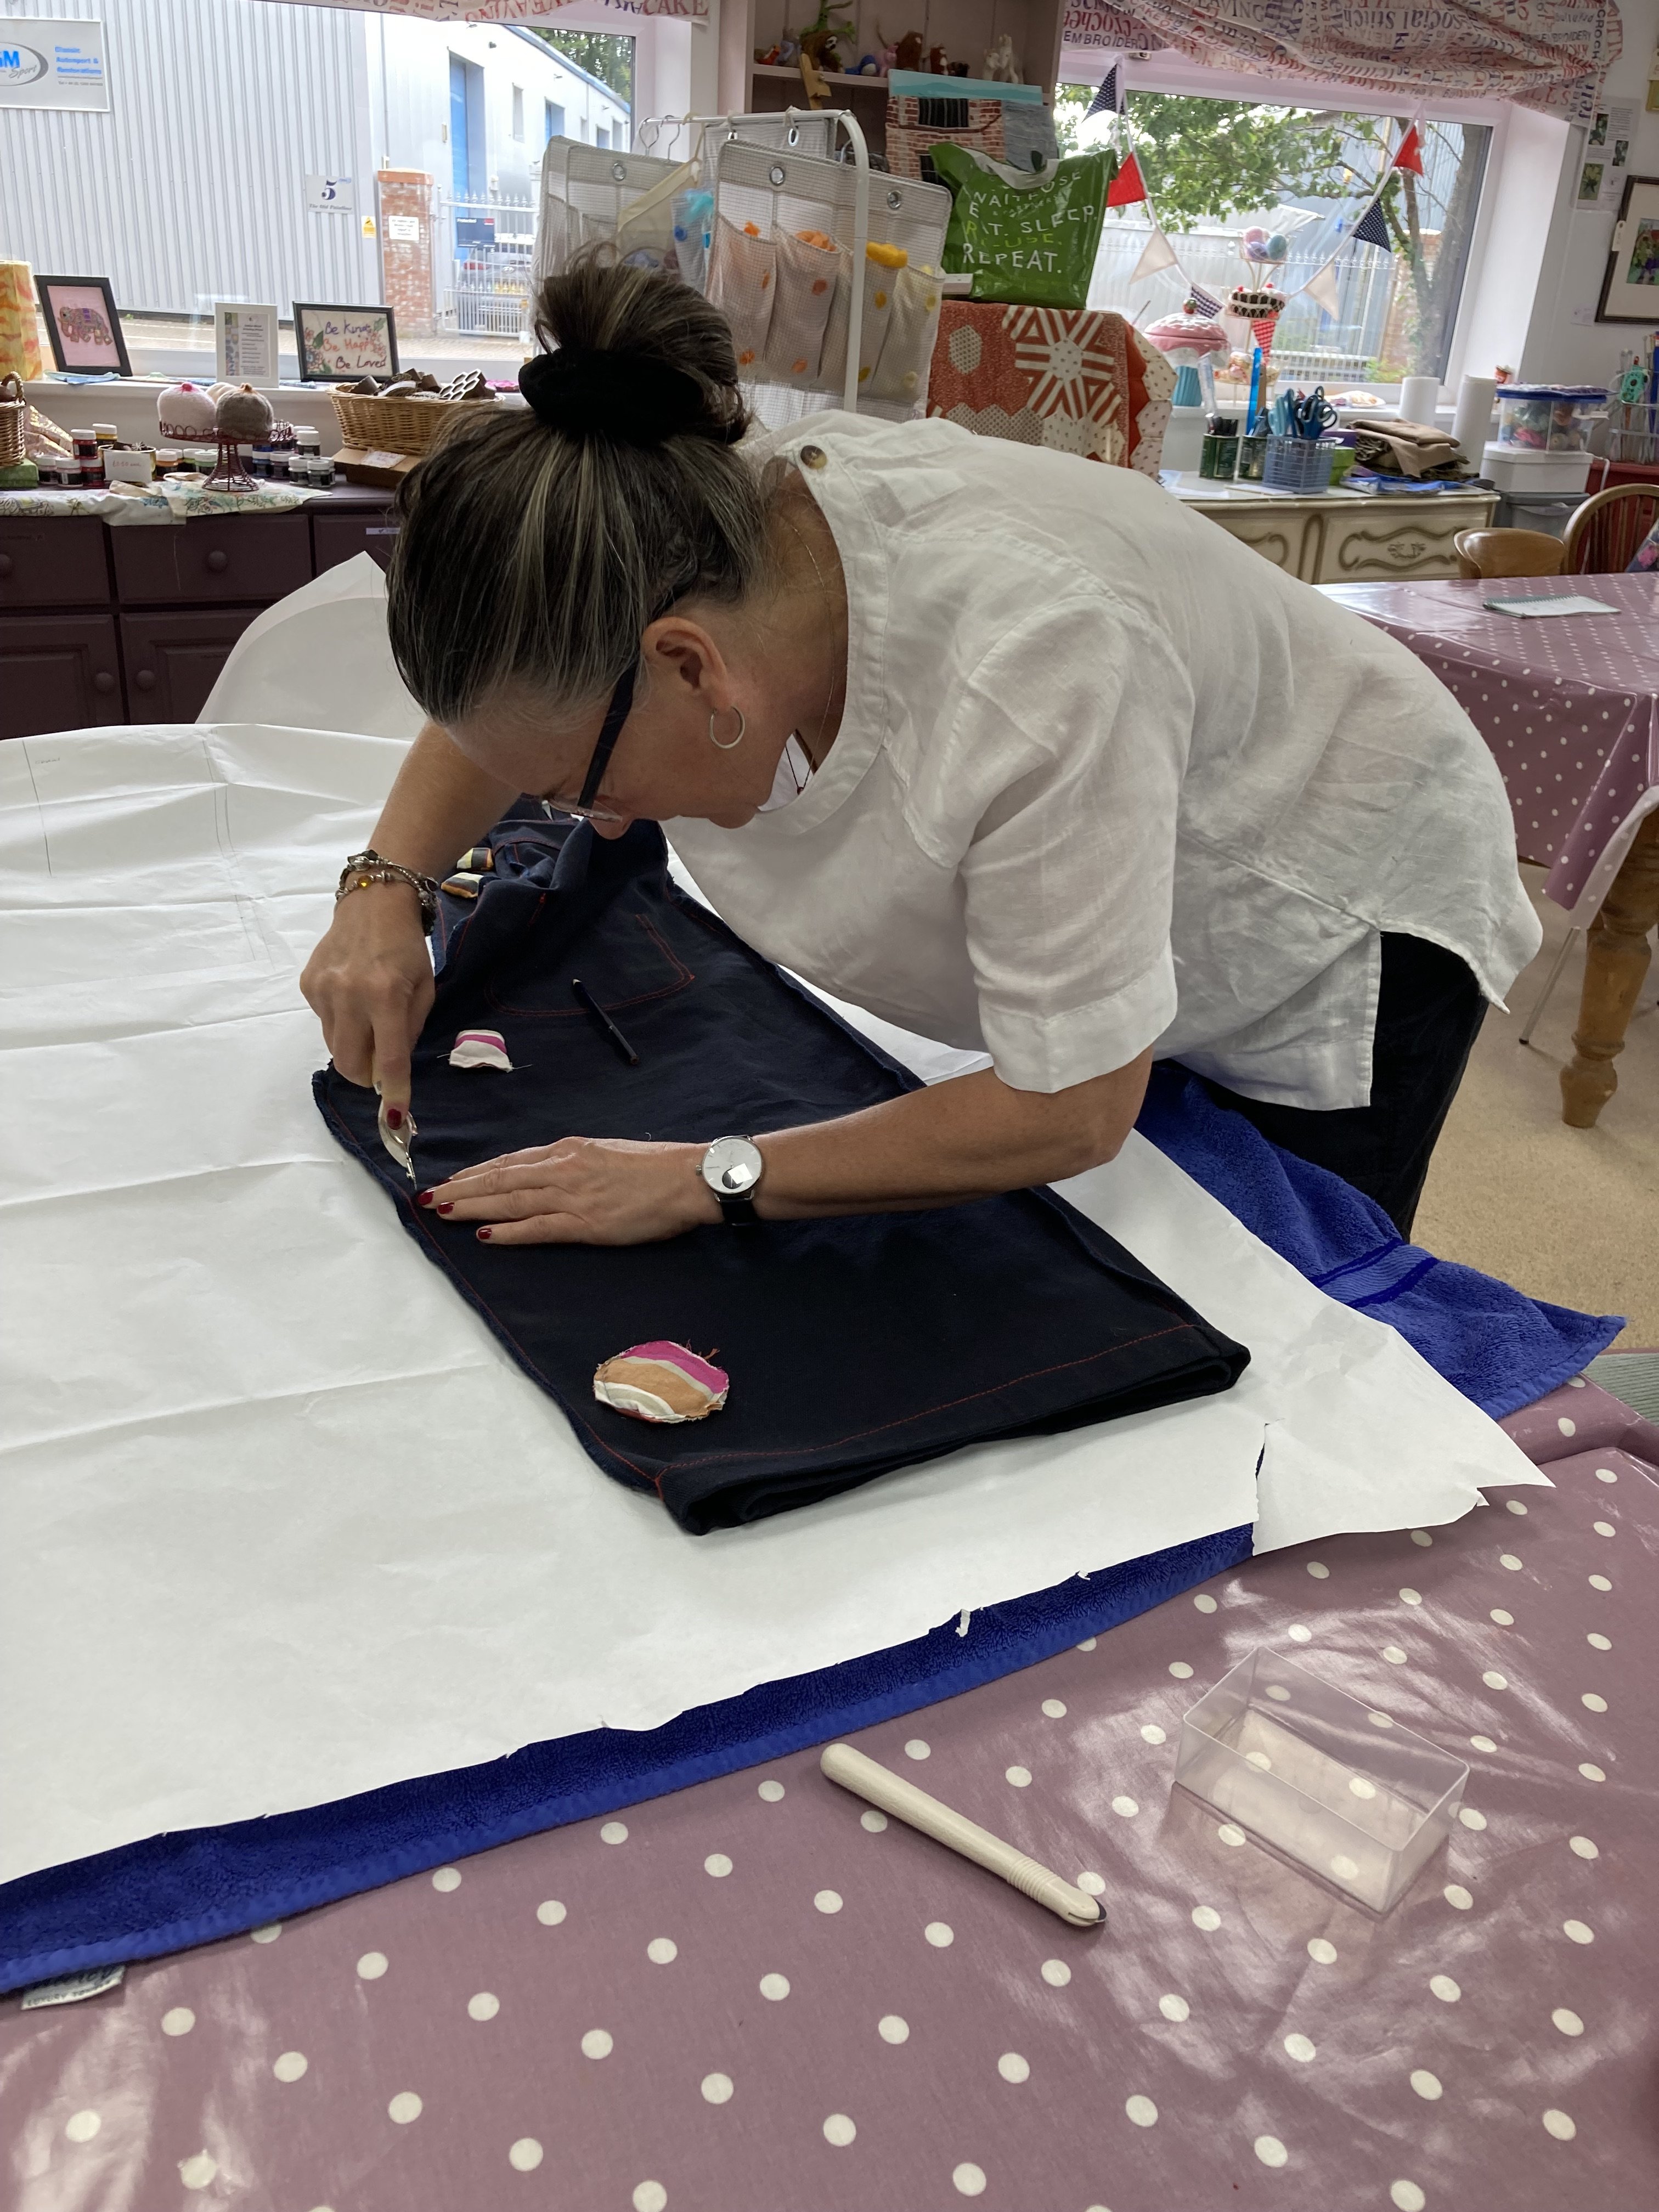 Dressmaking for Mind and Body - an 6 Week Dressmaking Course with Helen